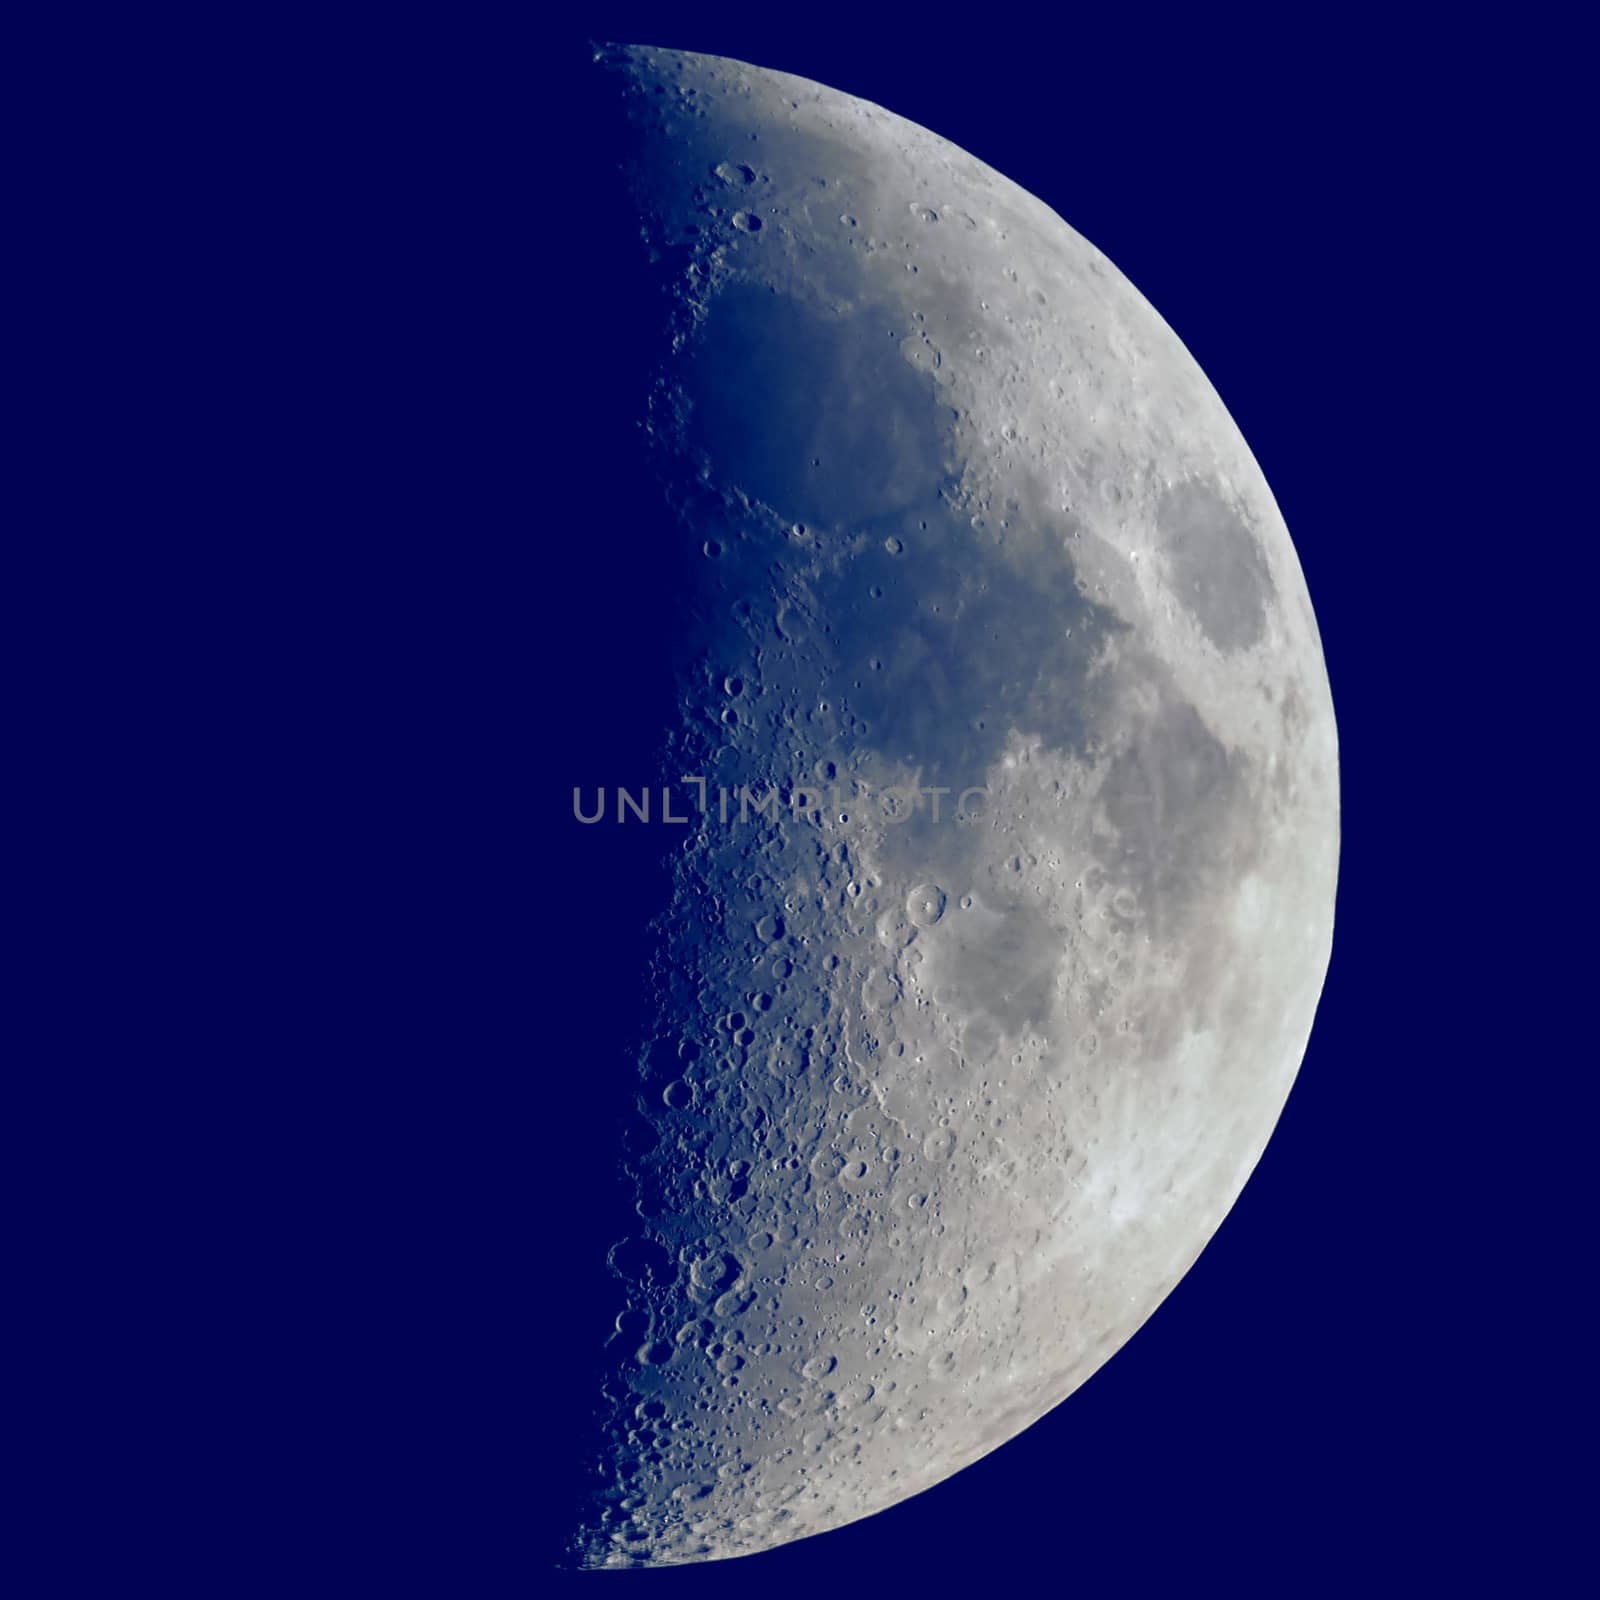 First quarter moon seen with an astronomical telescope, dark blue sky in square format